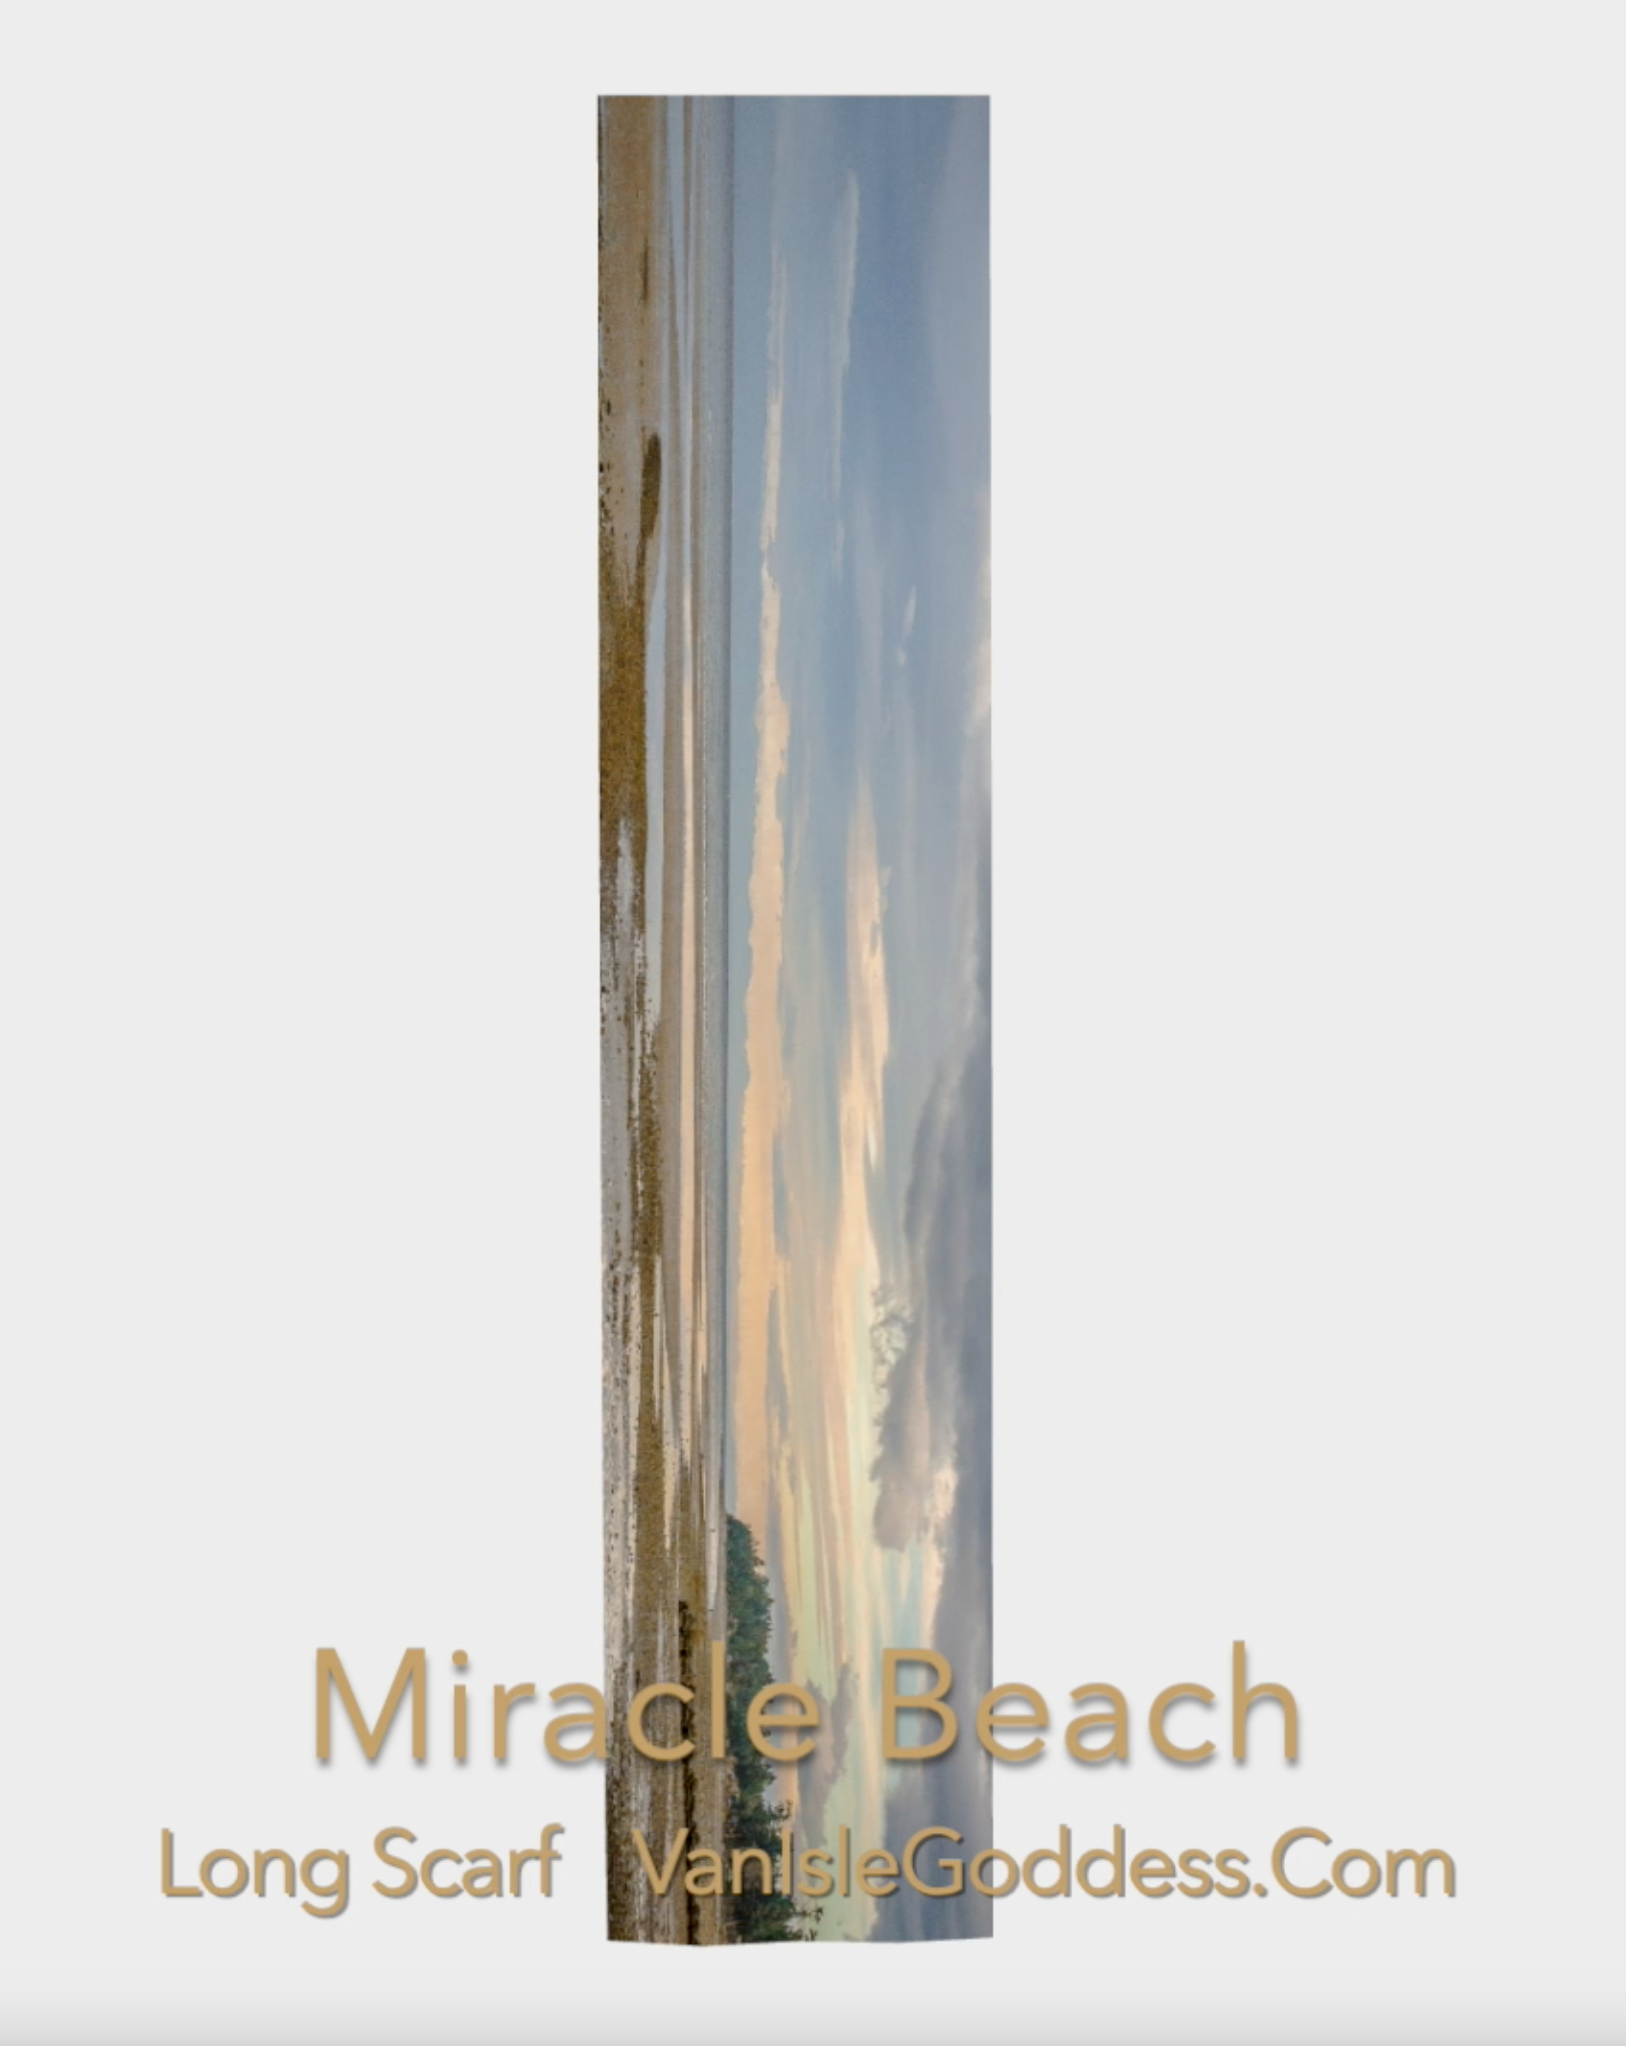 Miracle Beach long scarf shown with an image of Miracle beach.  The scarf is shown full length to show the entire image.